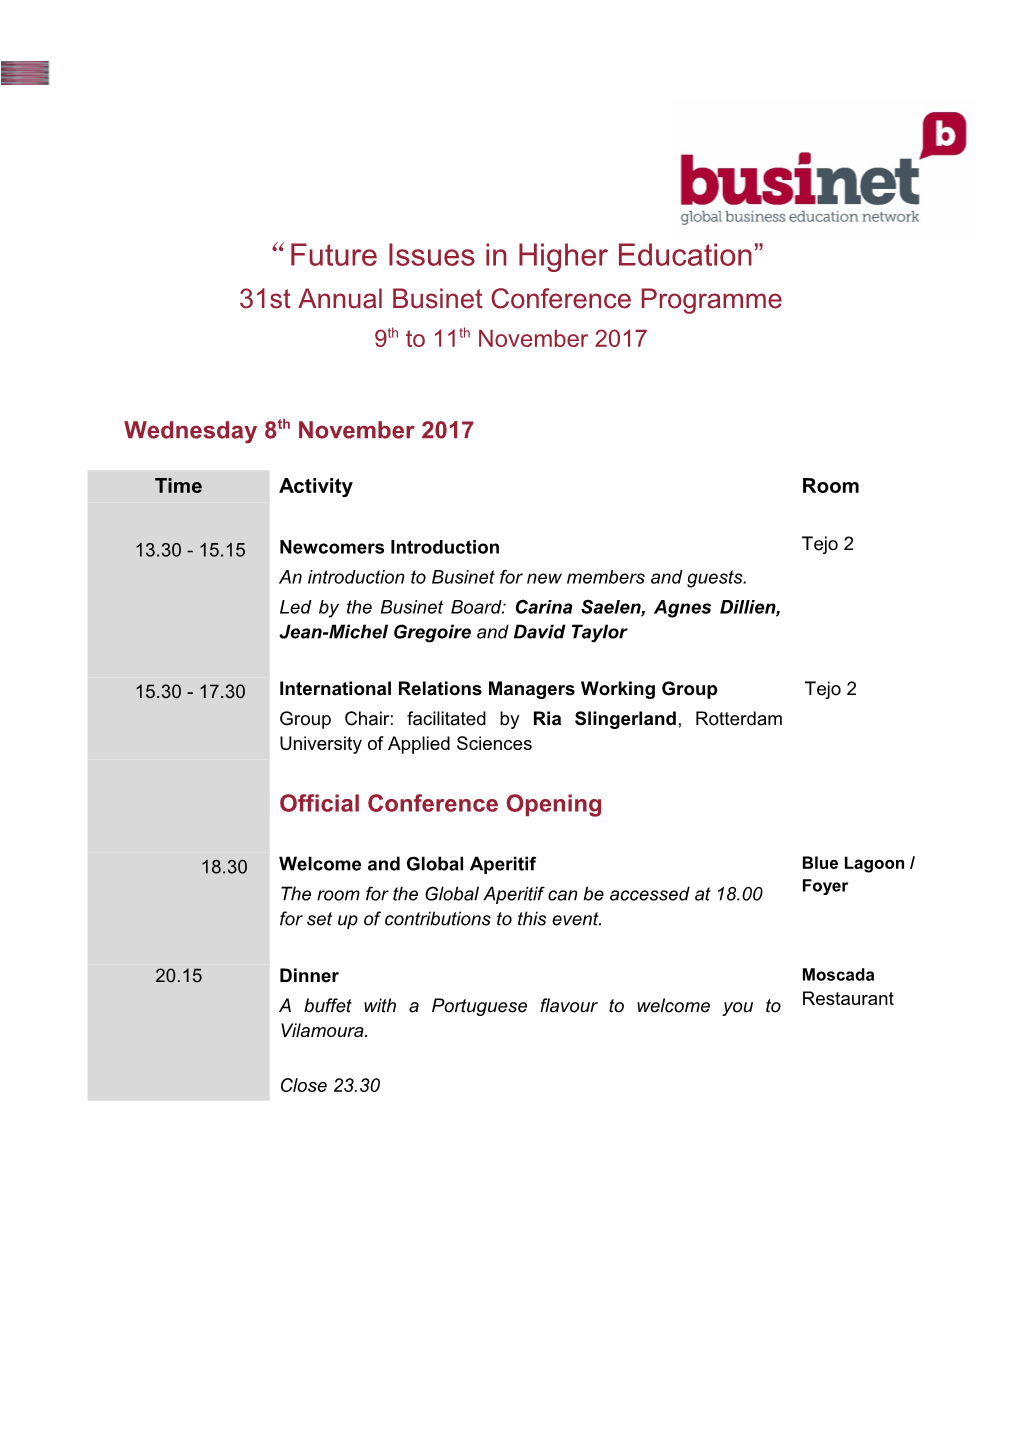 Future Issues in Higher Education